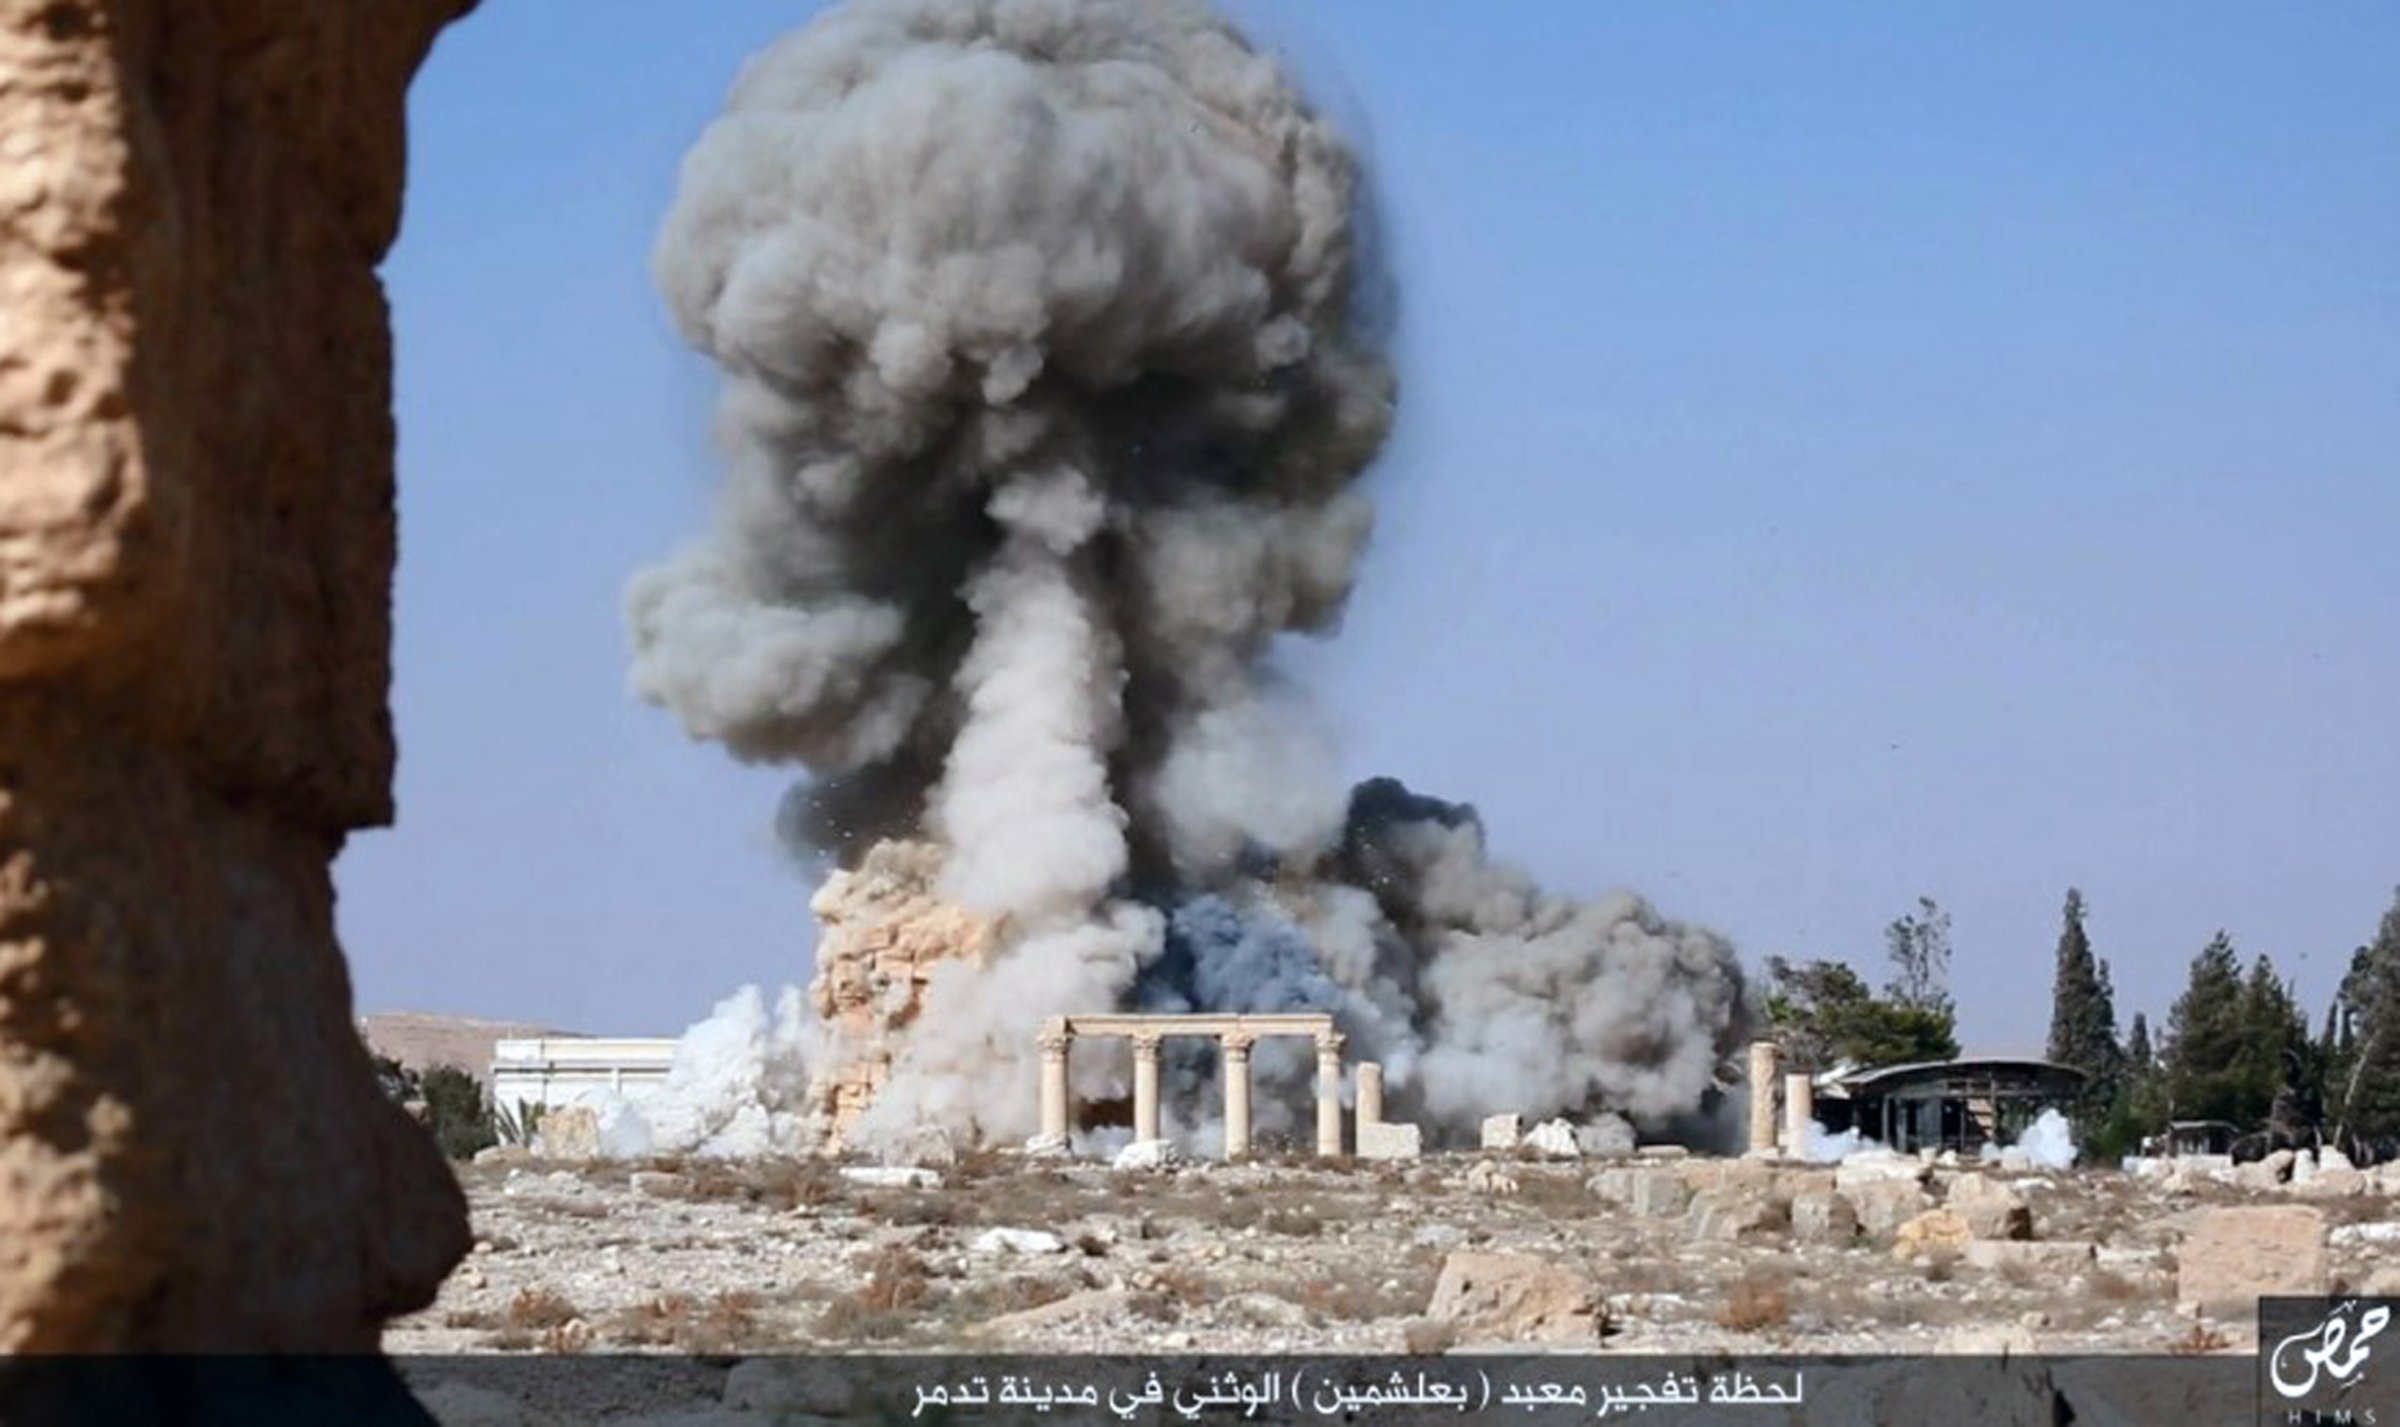 This undated photo released Tuesday, Aug. 25, 2015 on a social media site used by Islamic State militants, which has been verified and is consistent with other AP reporting, shows smoke from the detonation of the 2,000-year-old temple of Baalshamin in Syria's ancient caravan city of Palmyra. A resident of the city said the temple was destroyed on Sunday, a month after the group's militants booby-trapped it with explosives. Arabic at bottom reads, "The moment of detonation of the pagan Baalshamin temple in the city of Palmyra." (Islamic State social media account via AP)